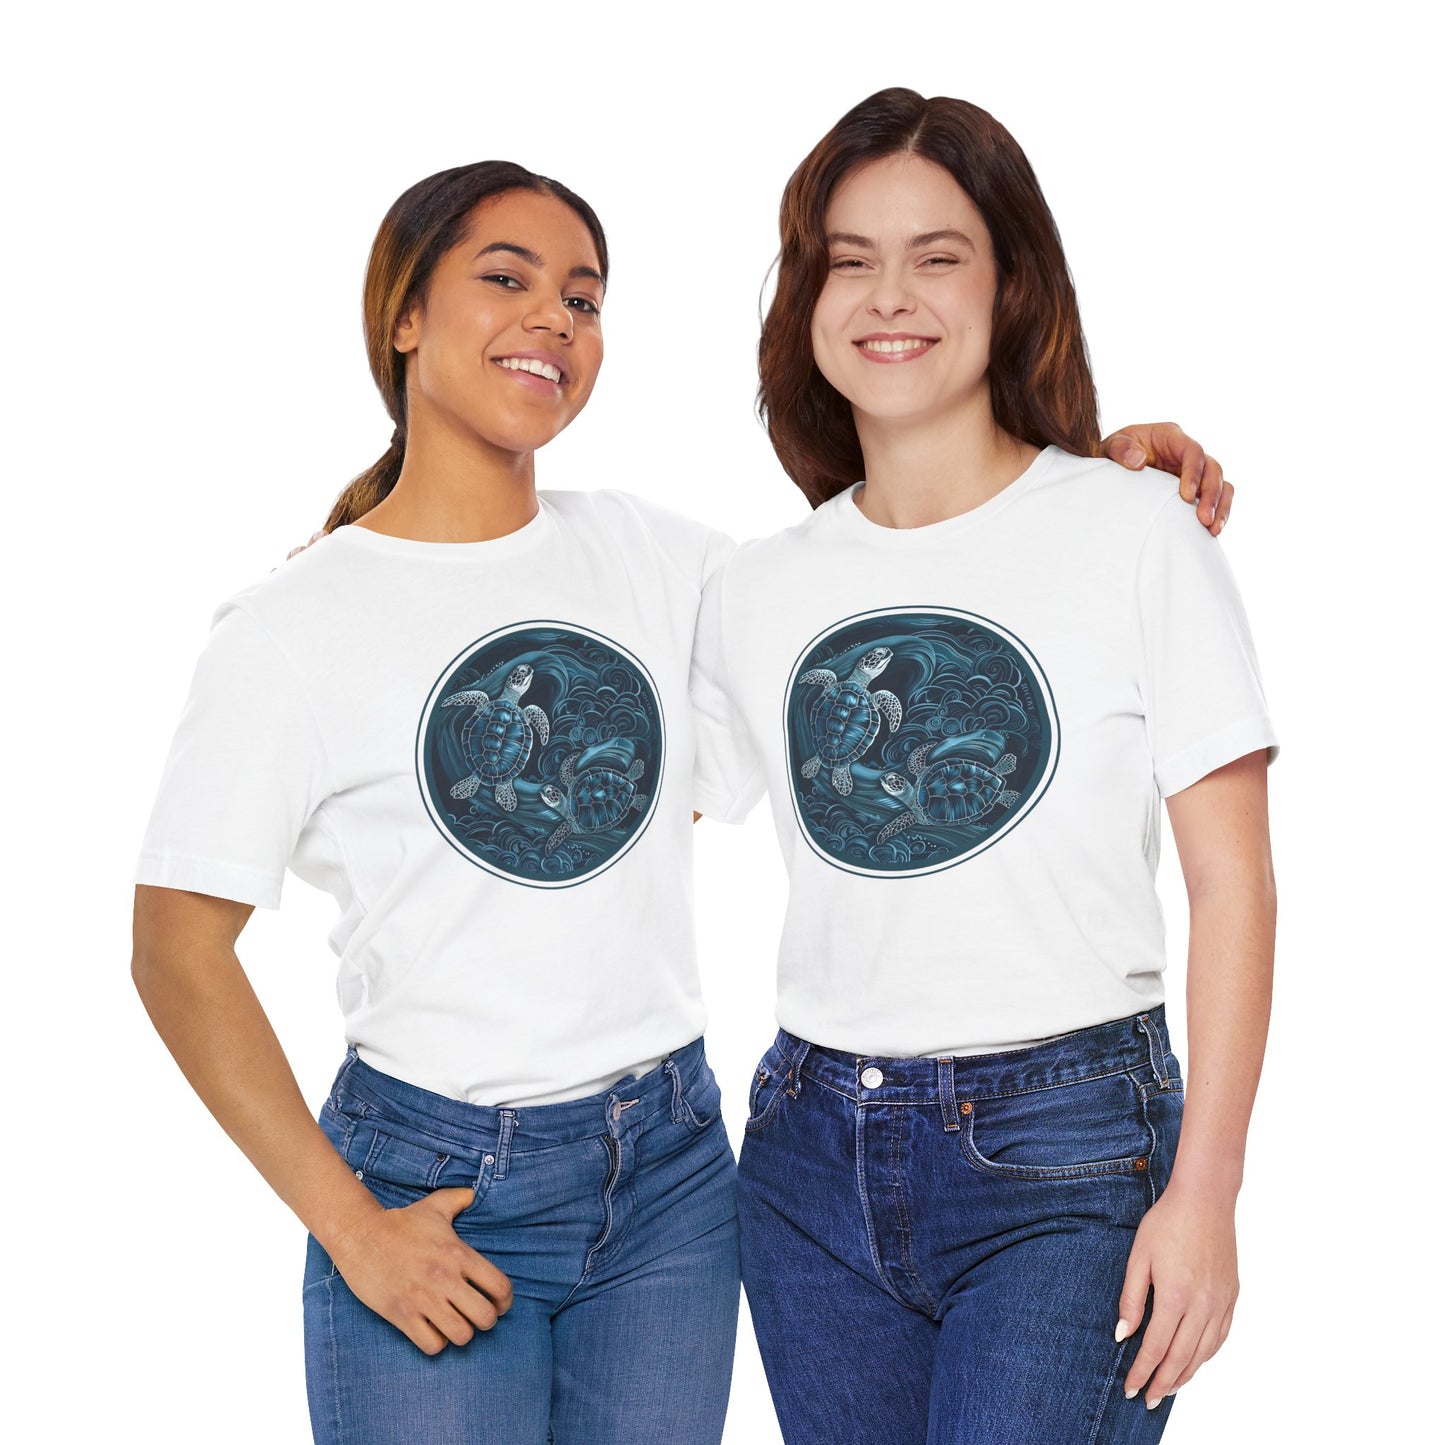 Mystic Sea Turtles Graphic Tee - Unisex Eco-Friendly Cotton Shirt by JD Cove